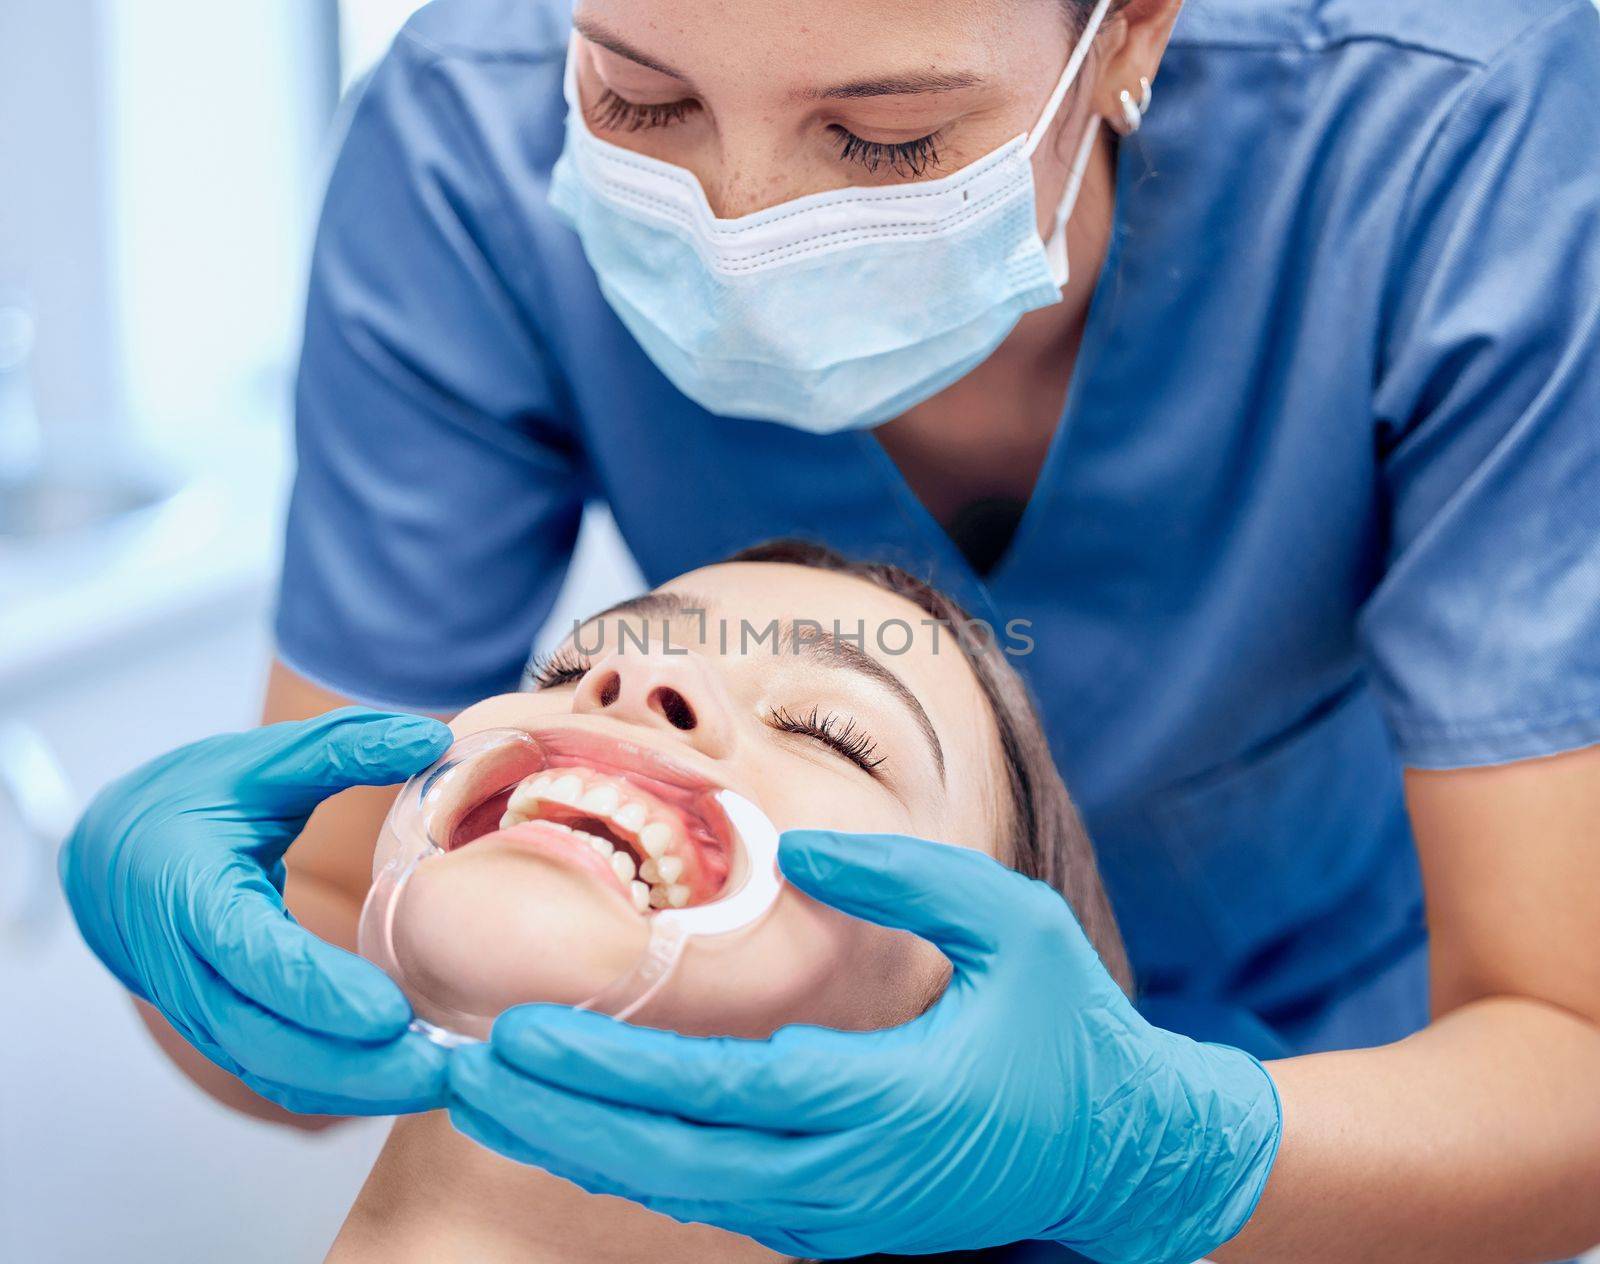 This feels so uncomfortable. a young dental assistant checking her patients mouth